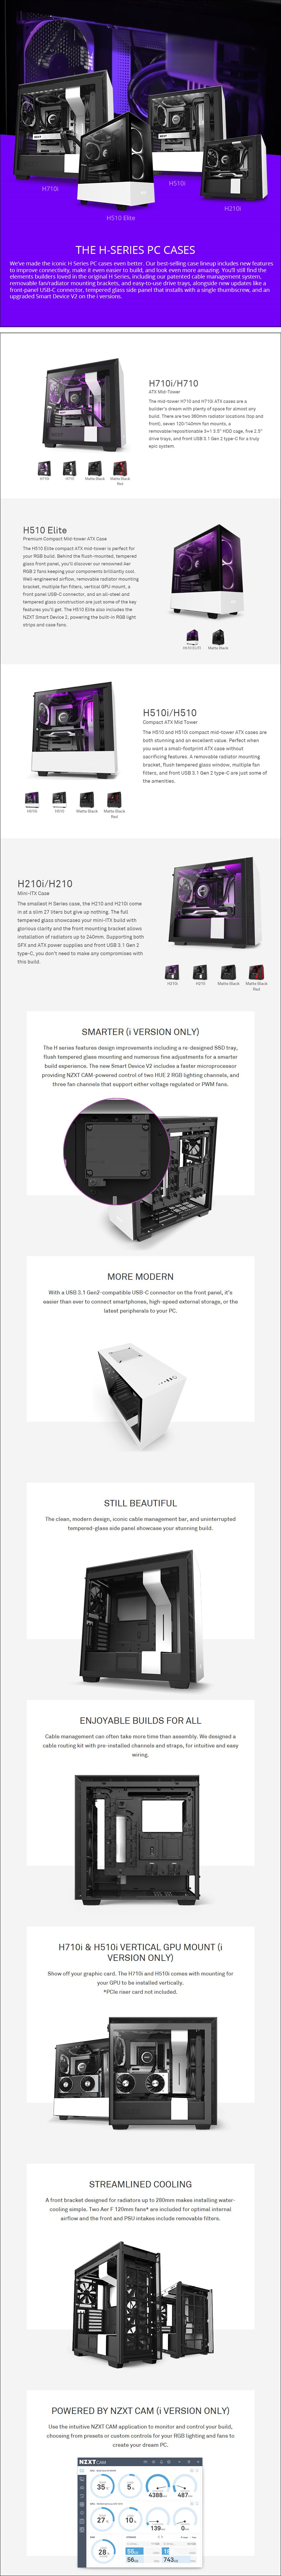 NZXT H210 Tempered Glass Mini-ITX Case - Overview 1